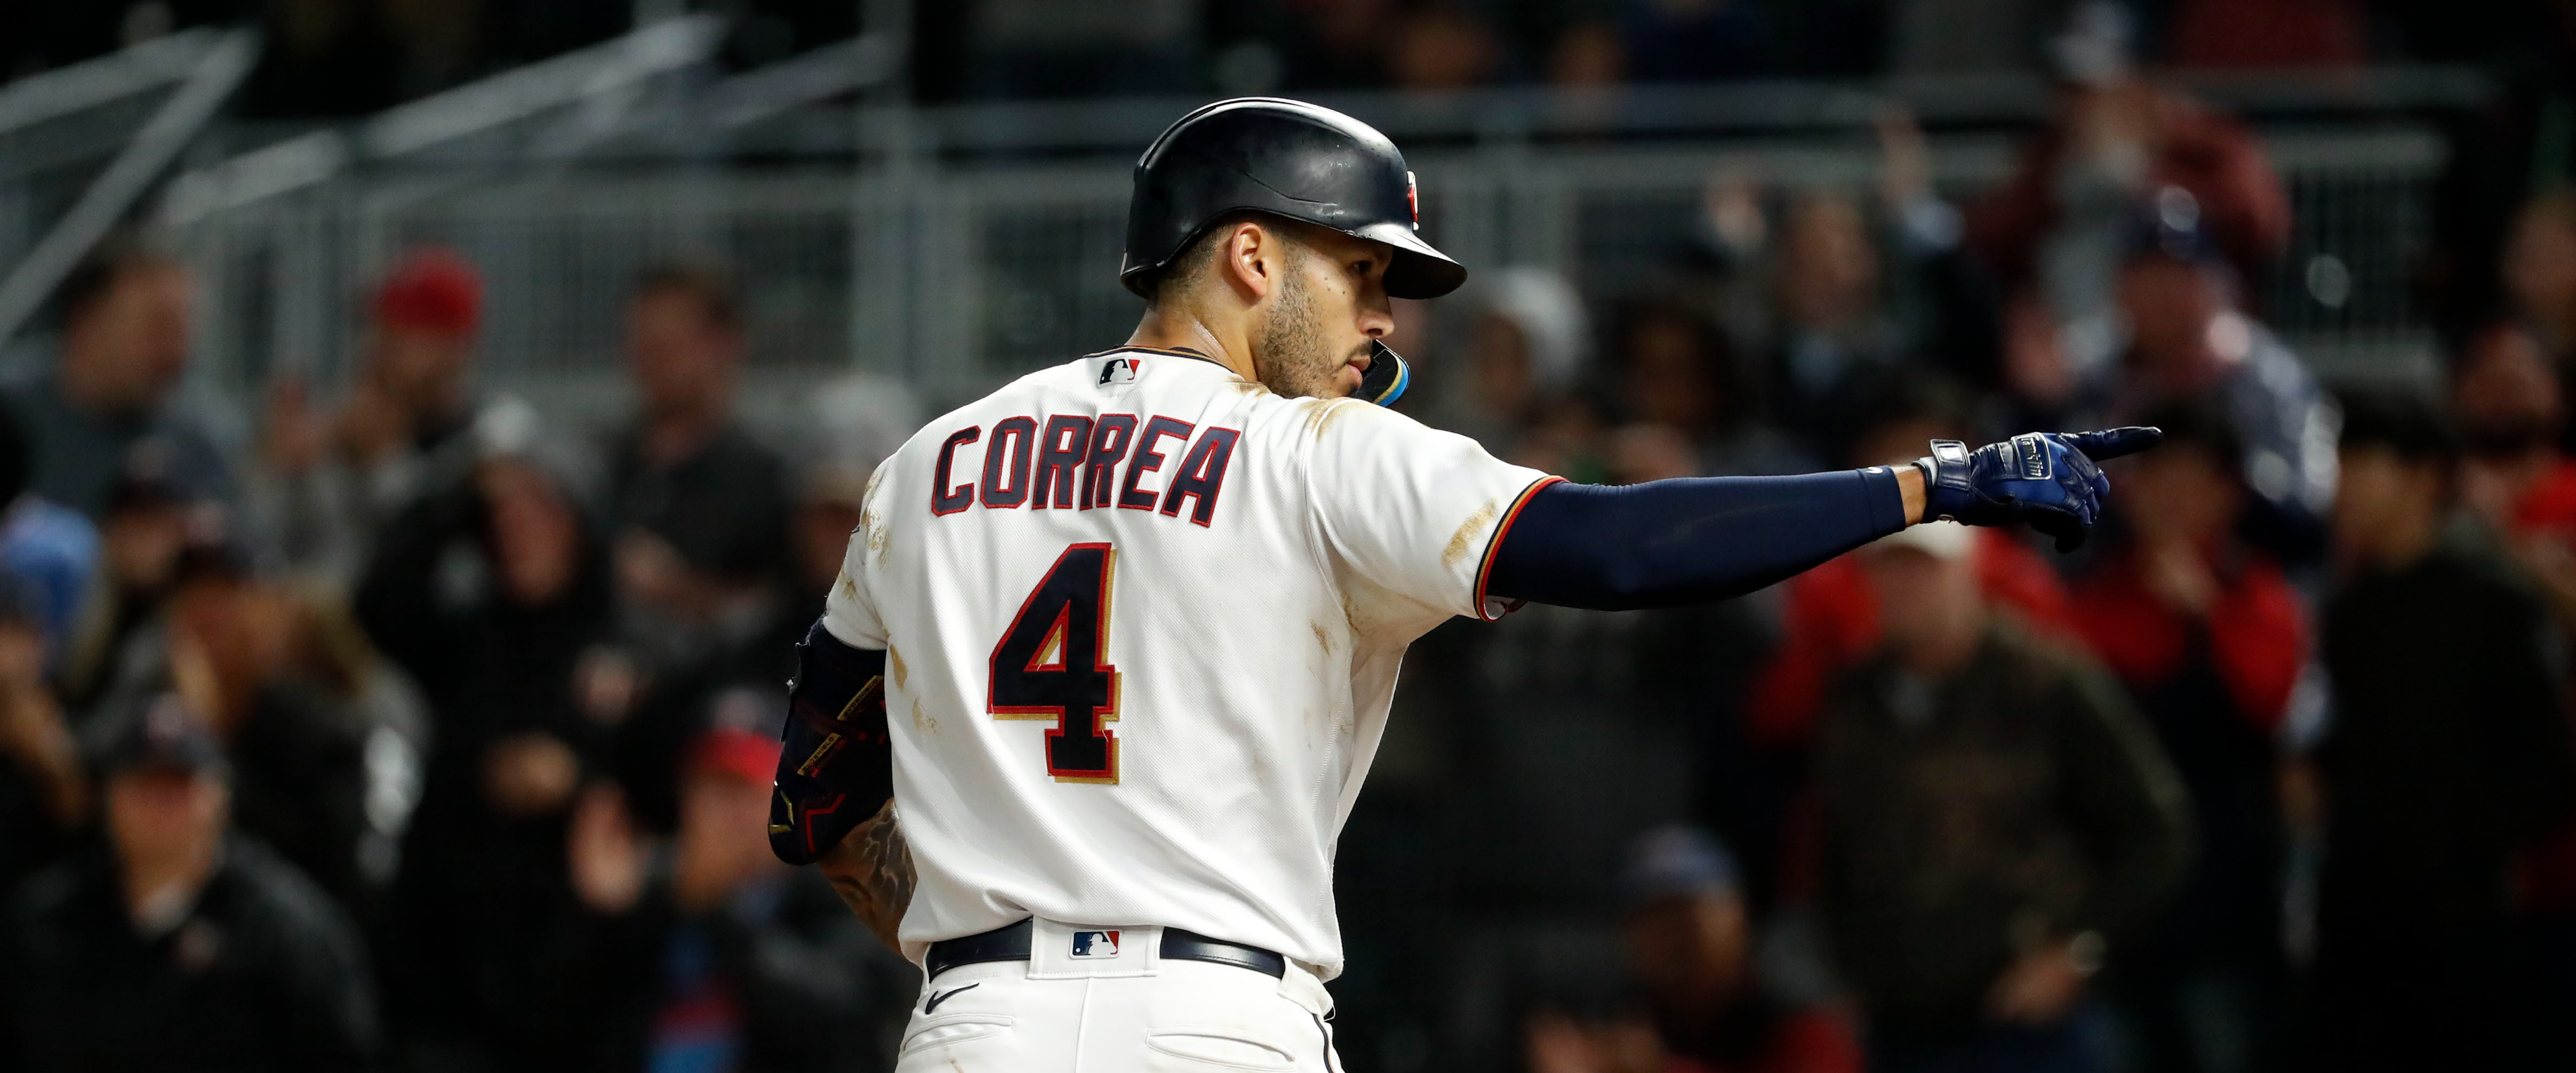 Carlos Correa signs $350 million deal with the San Francisco Giants